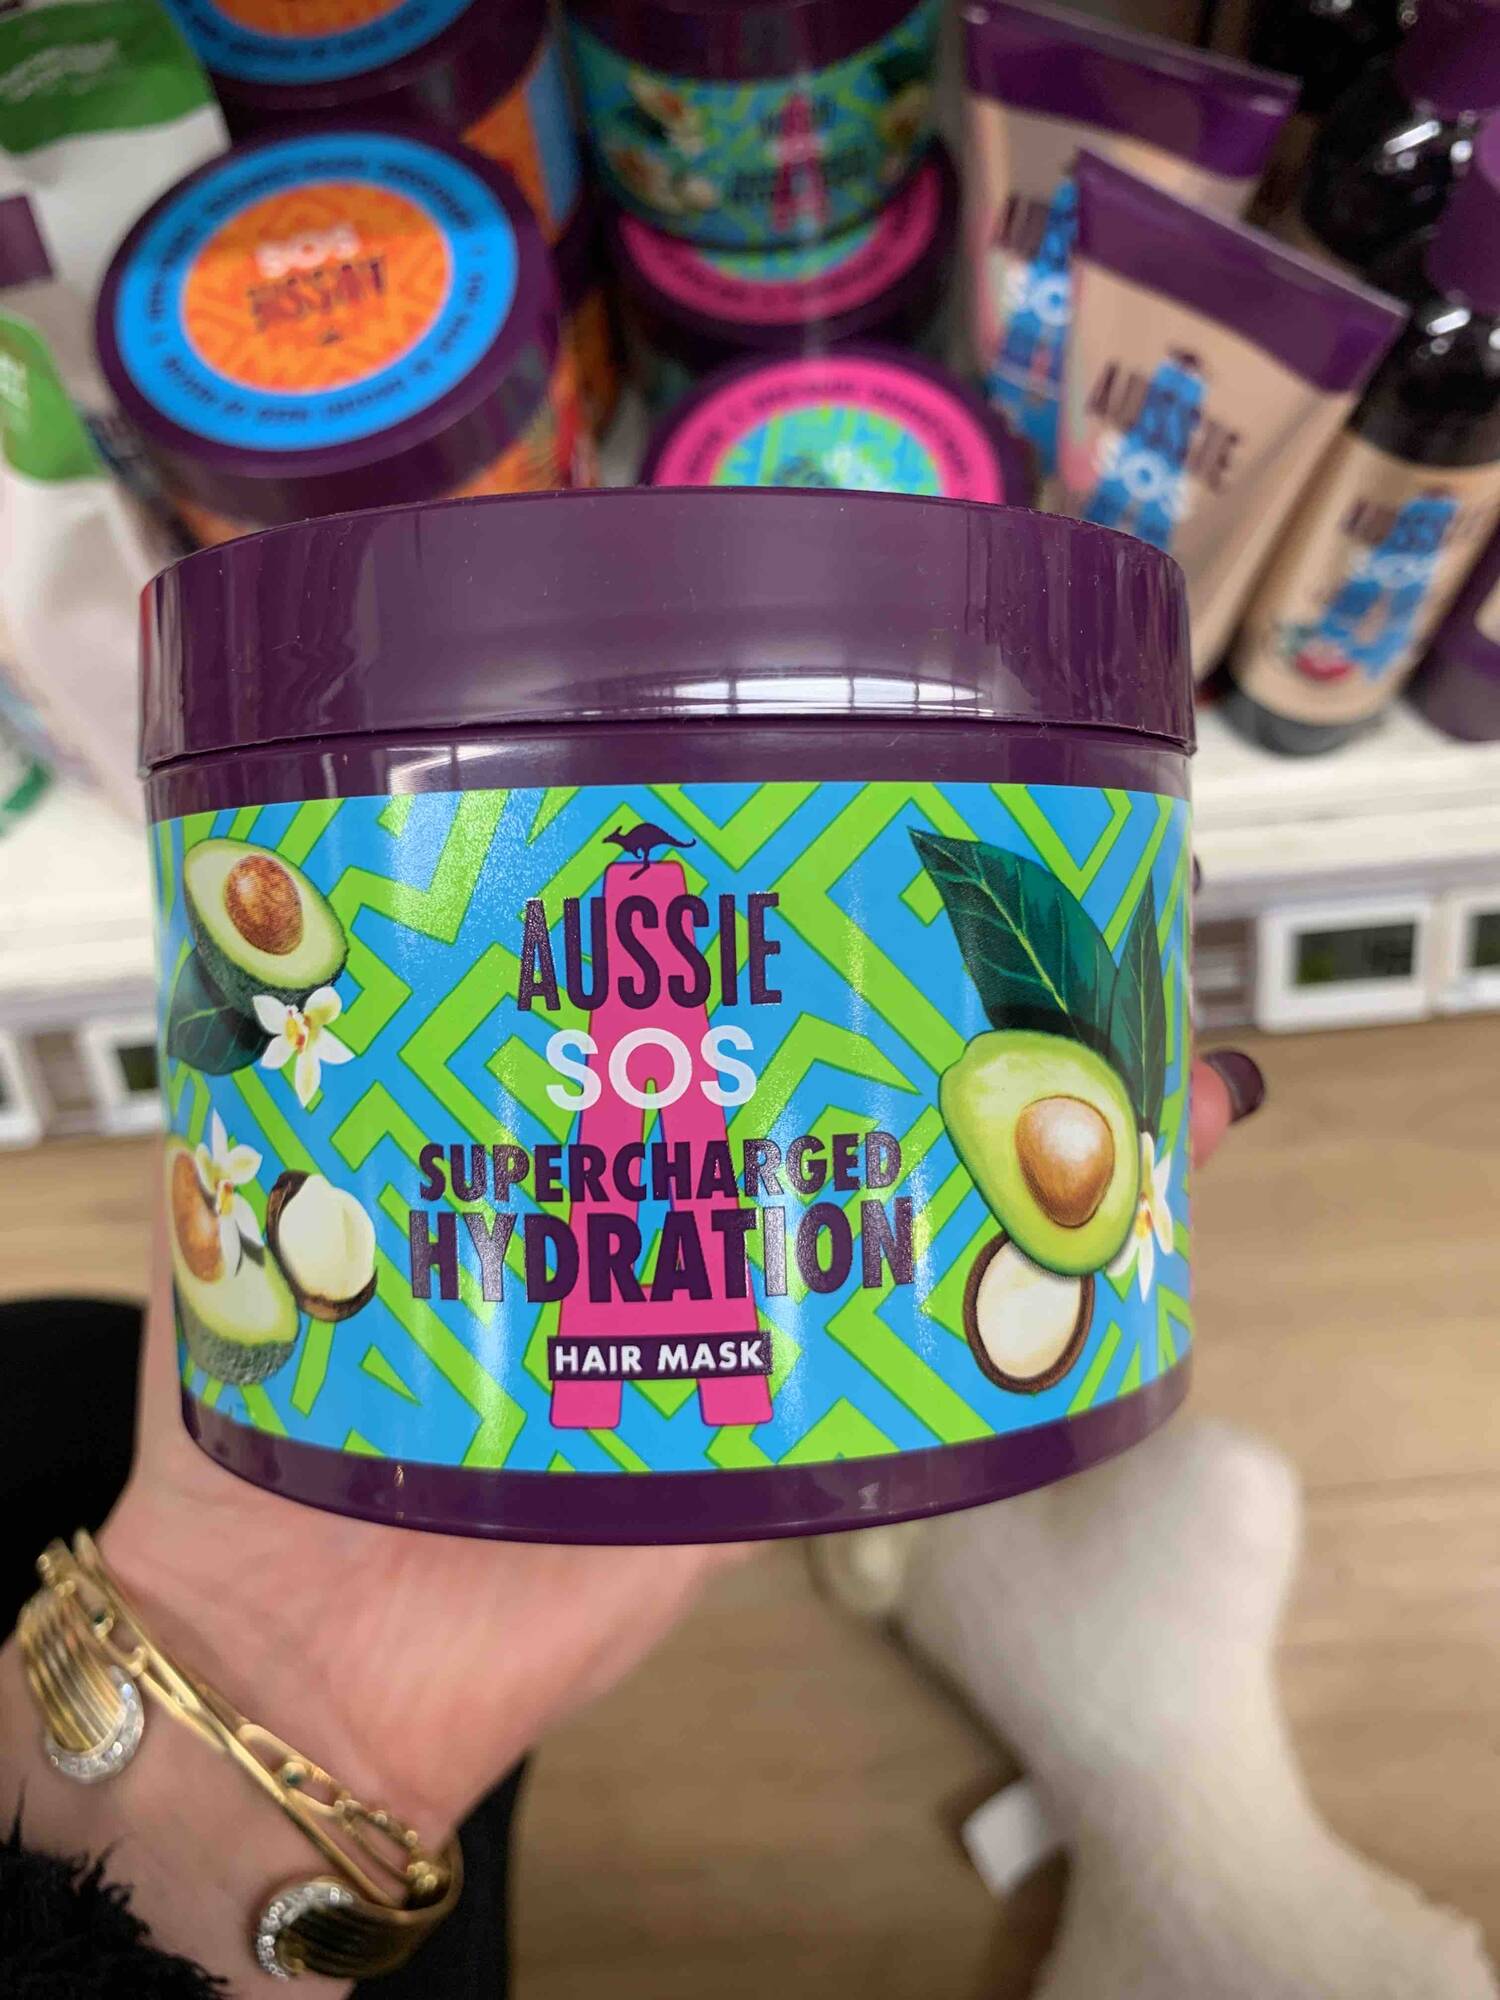 AUSSIE - SOS - Supercharged hydration hair mask